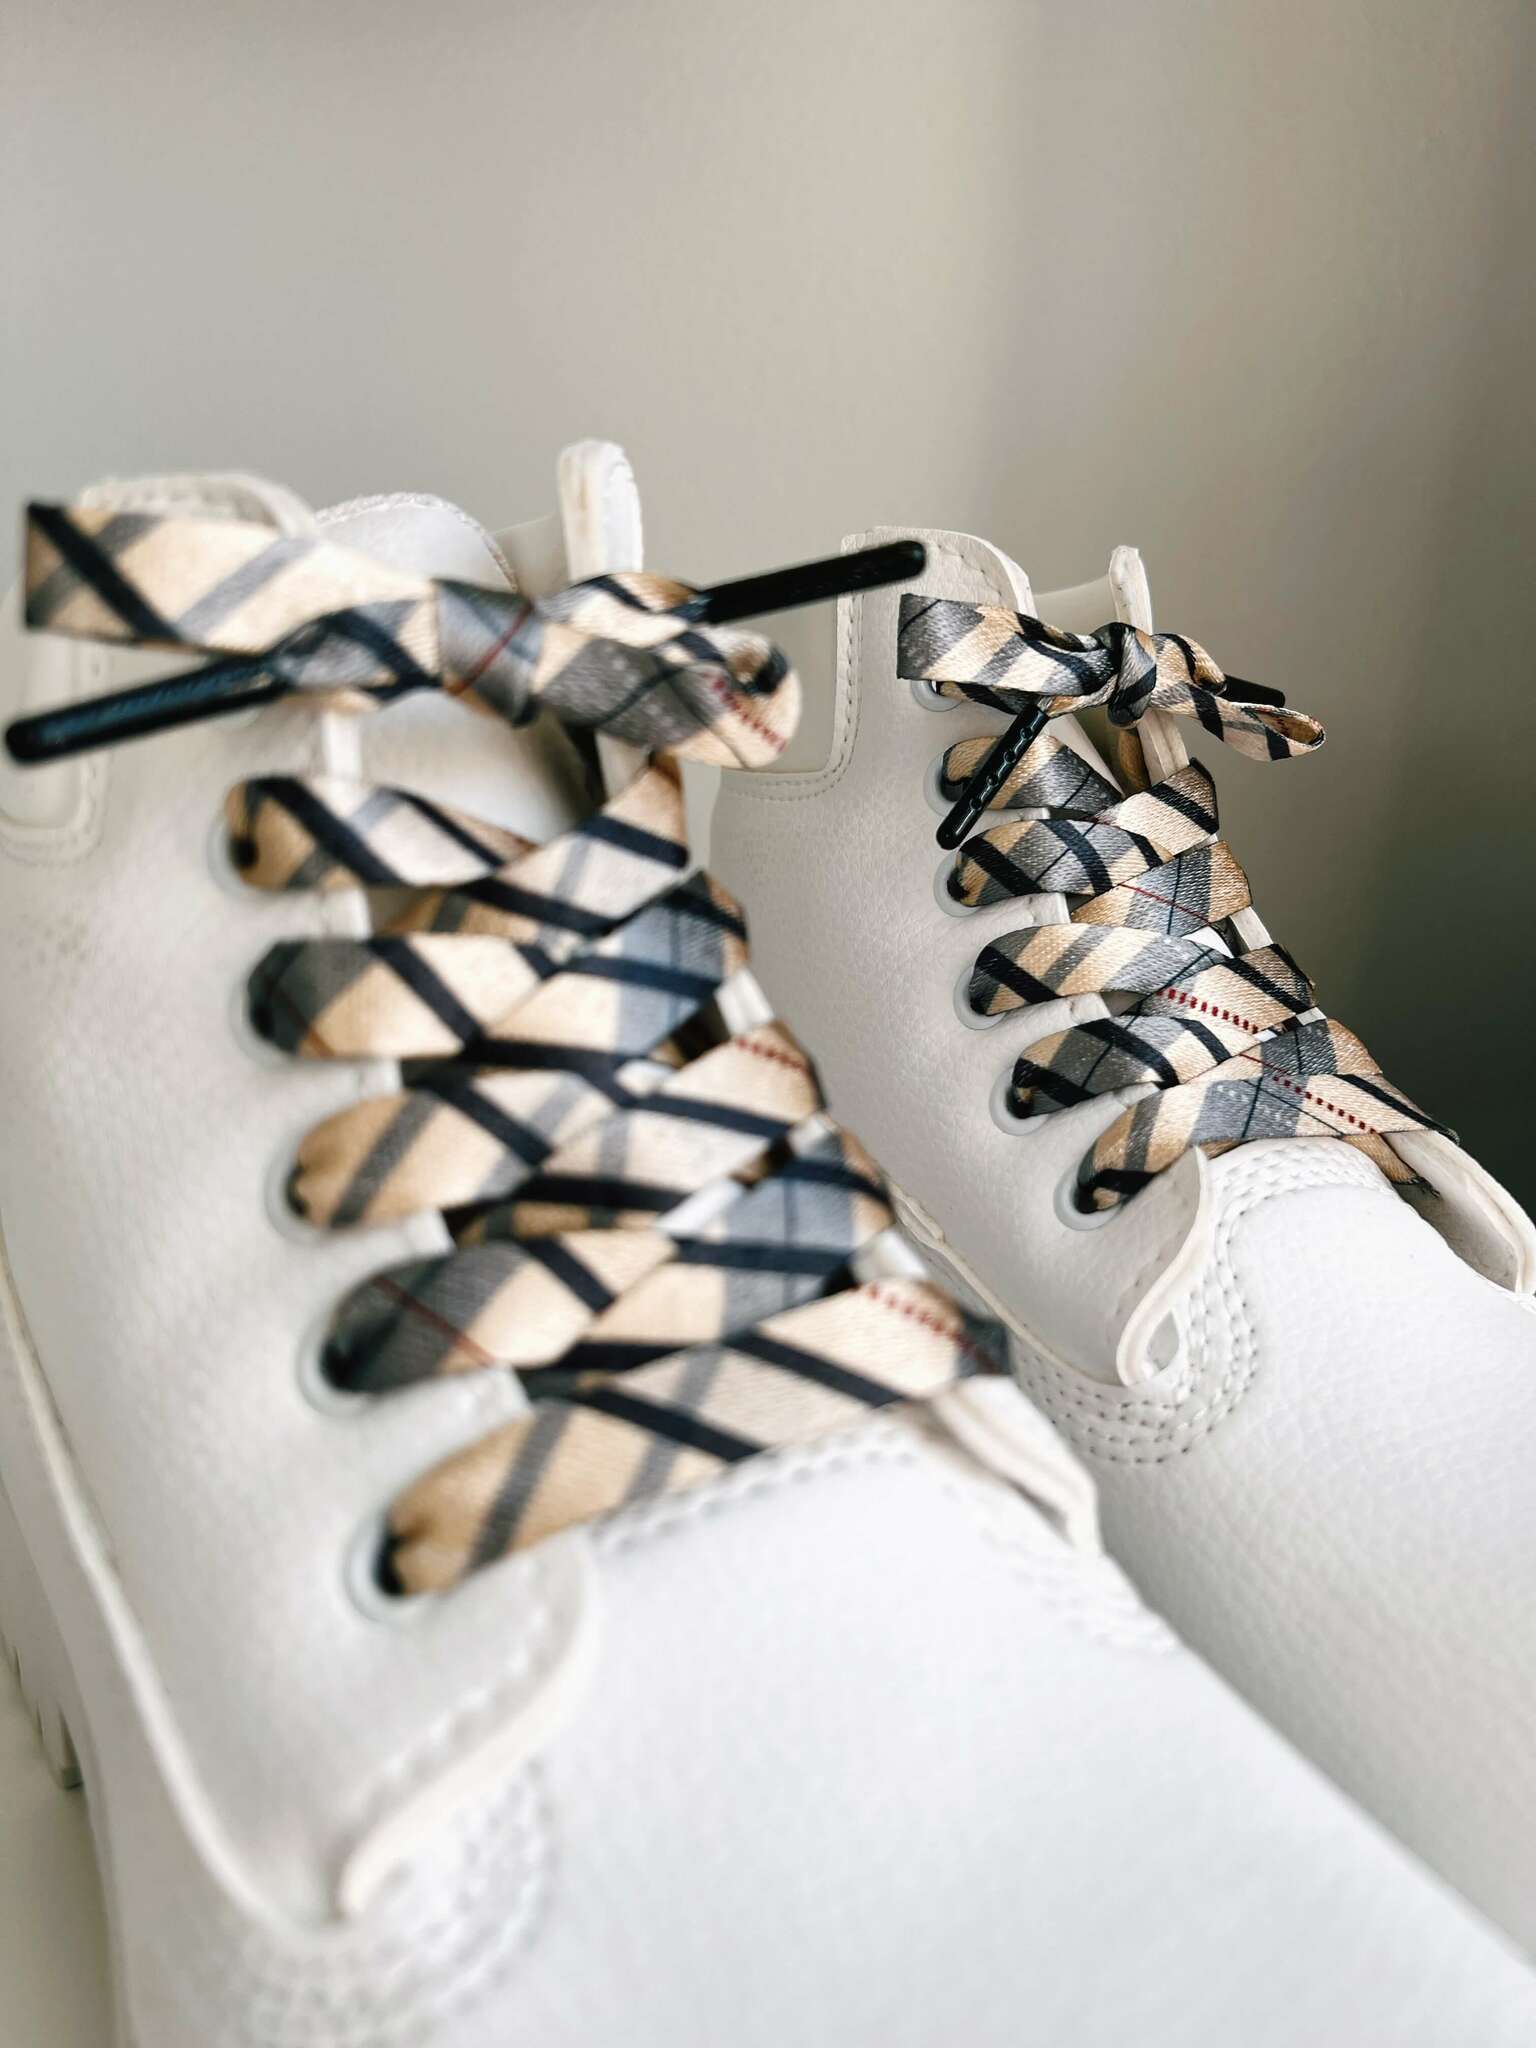 Checkered beige patterned shoelaces - The Shoelace Brand